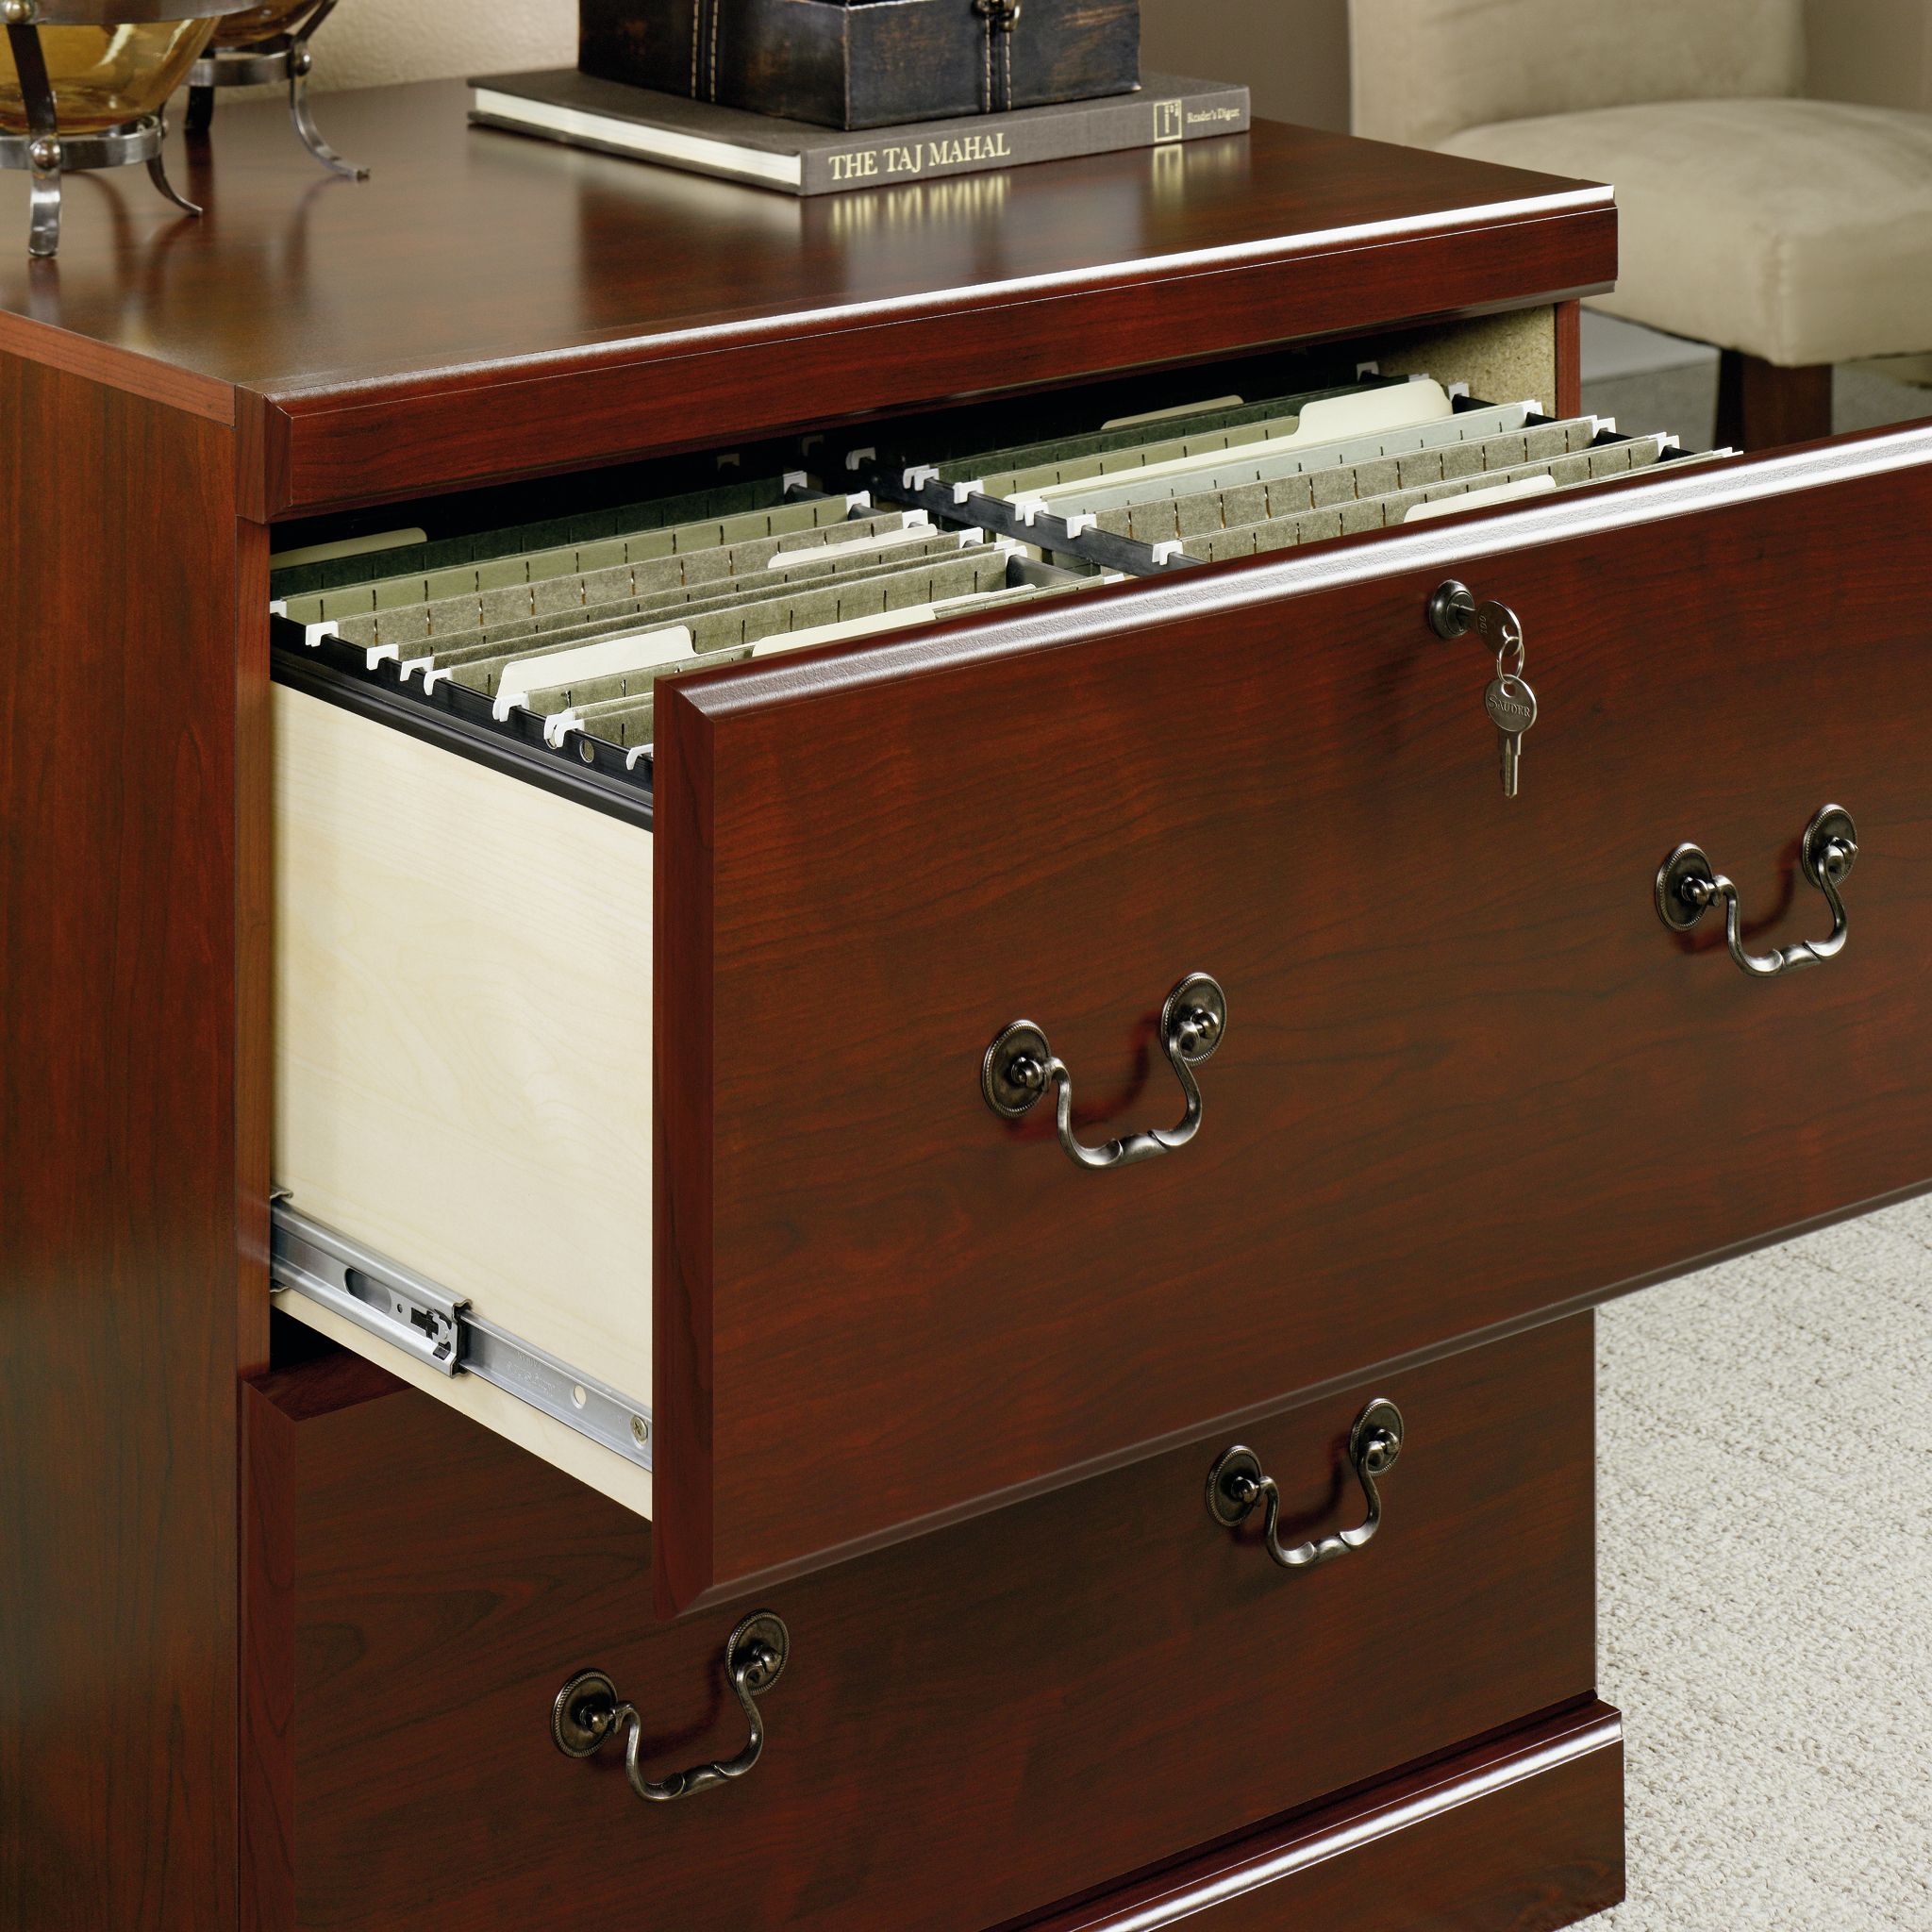 Sauder Heritage Hill Lateral File Cabinet, Classic Cherry Finish - image 4 of 5